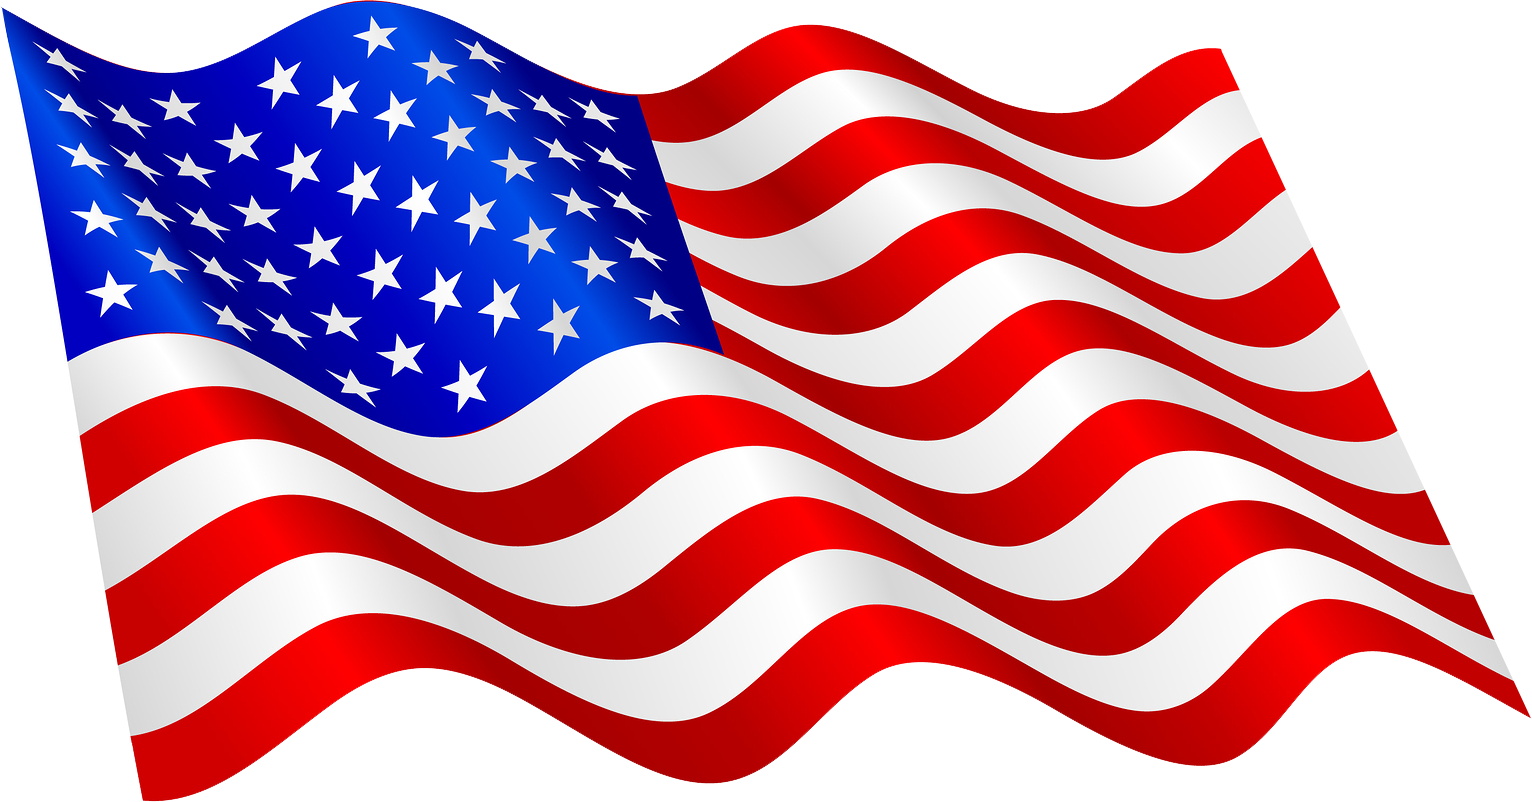 This High Quality Free Png Image Without Any Background - Waving American Flag Clip Art (1532x802)